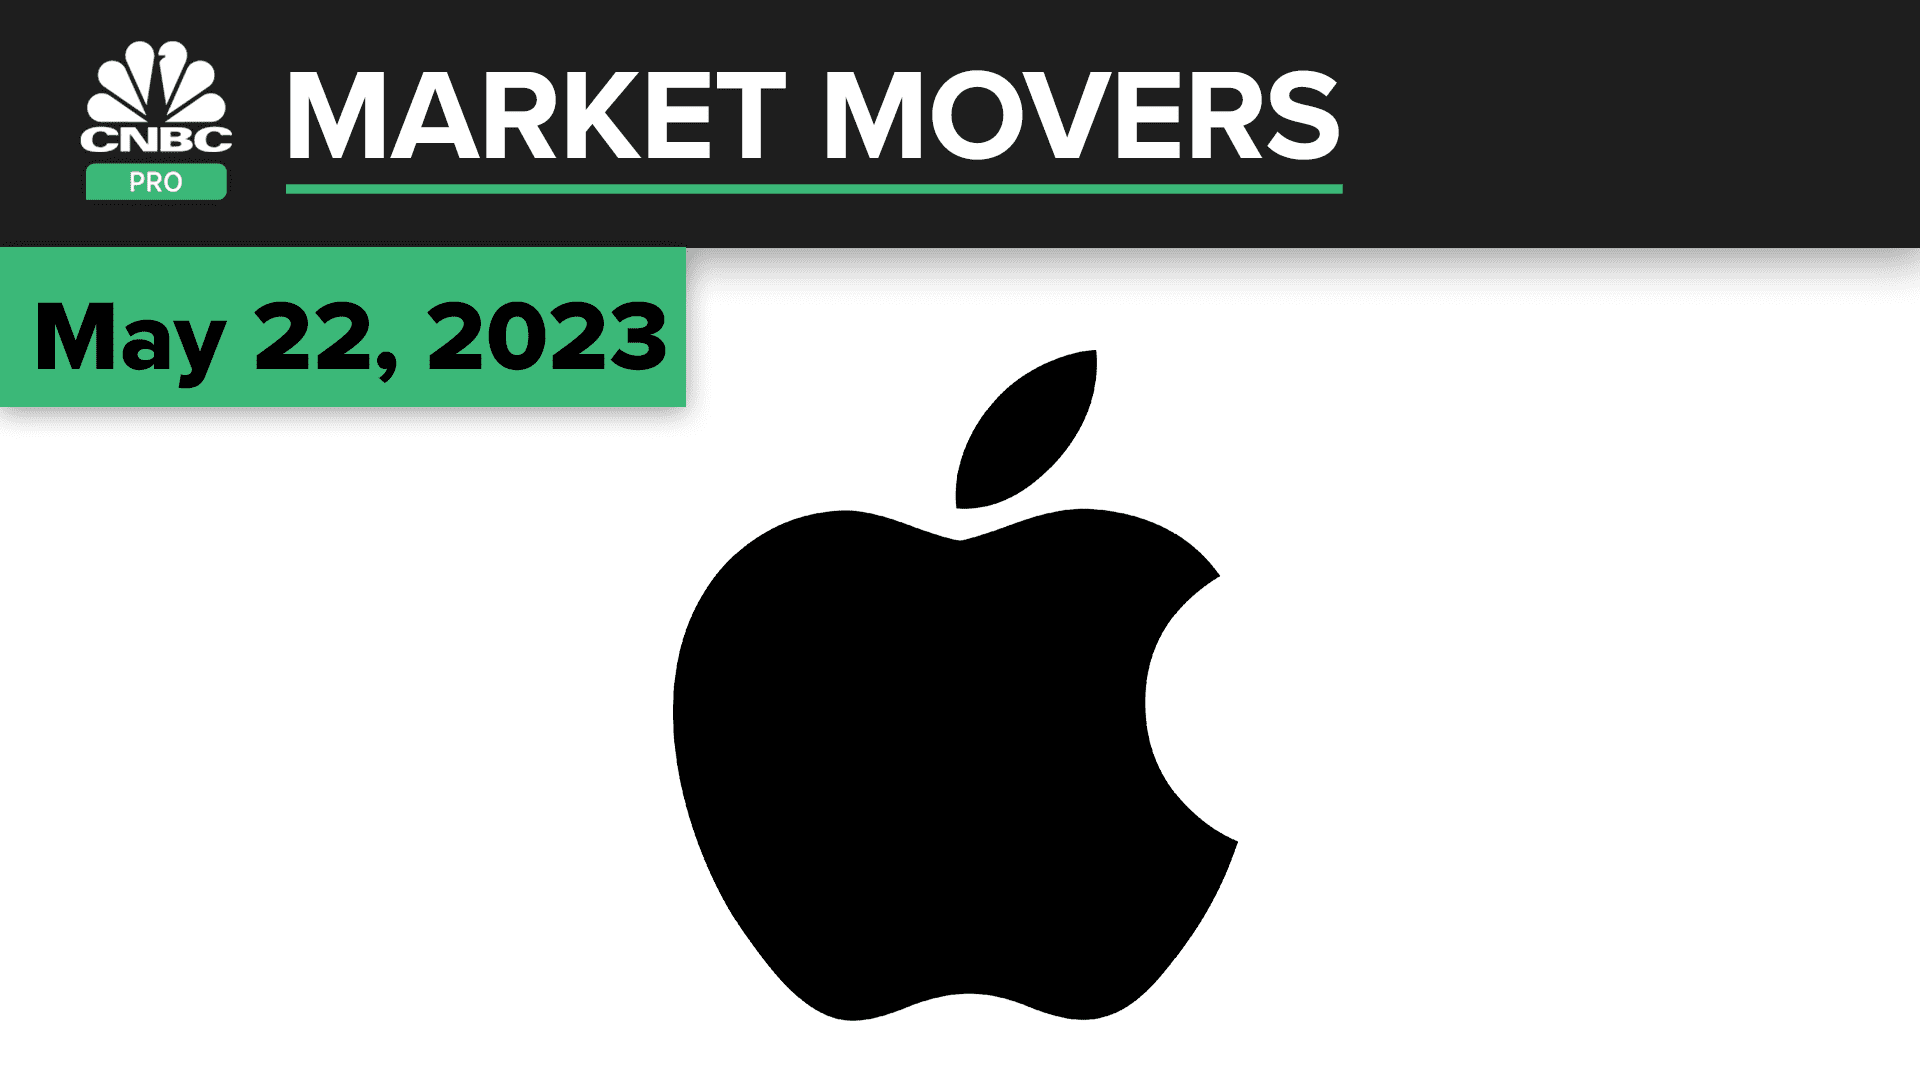 Apple trades unchanged although it is rarely downgraded.  Here's what the experts have to say